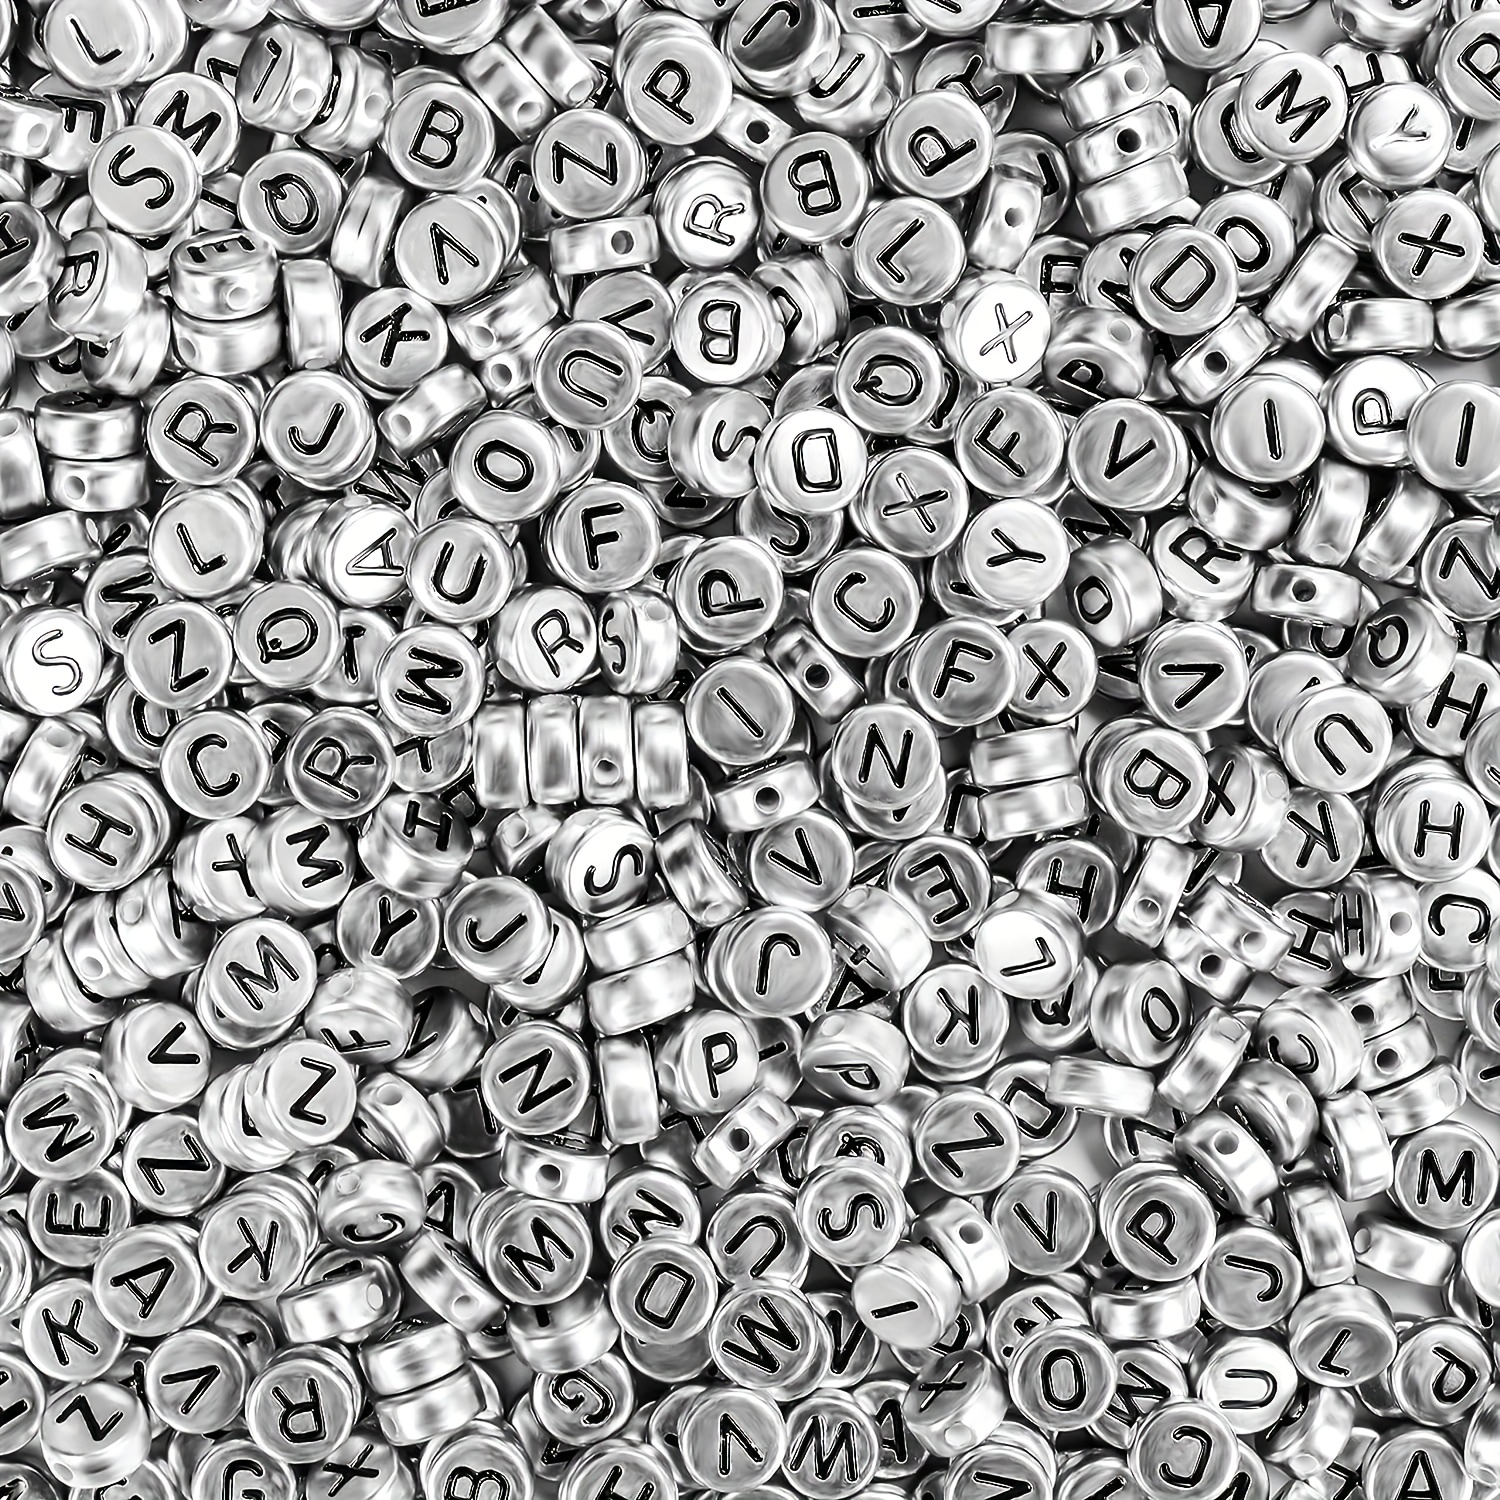 

1000/500pcs Silvery Acrylic A-z Letter Beads For Jewelry Making Diy Bracelets Necklaces Keychains Phone Bag Chains Small Business Supplies